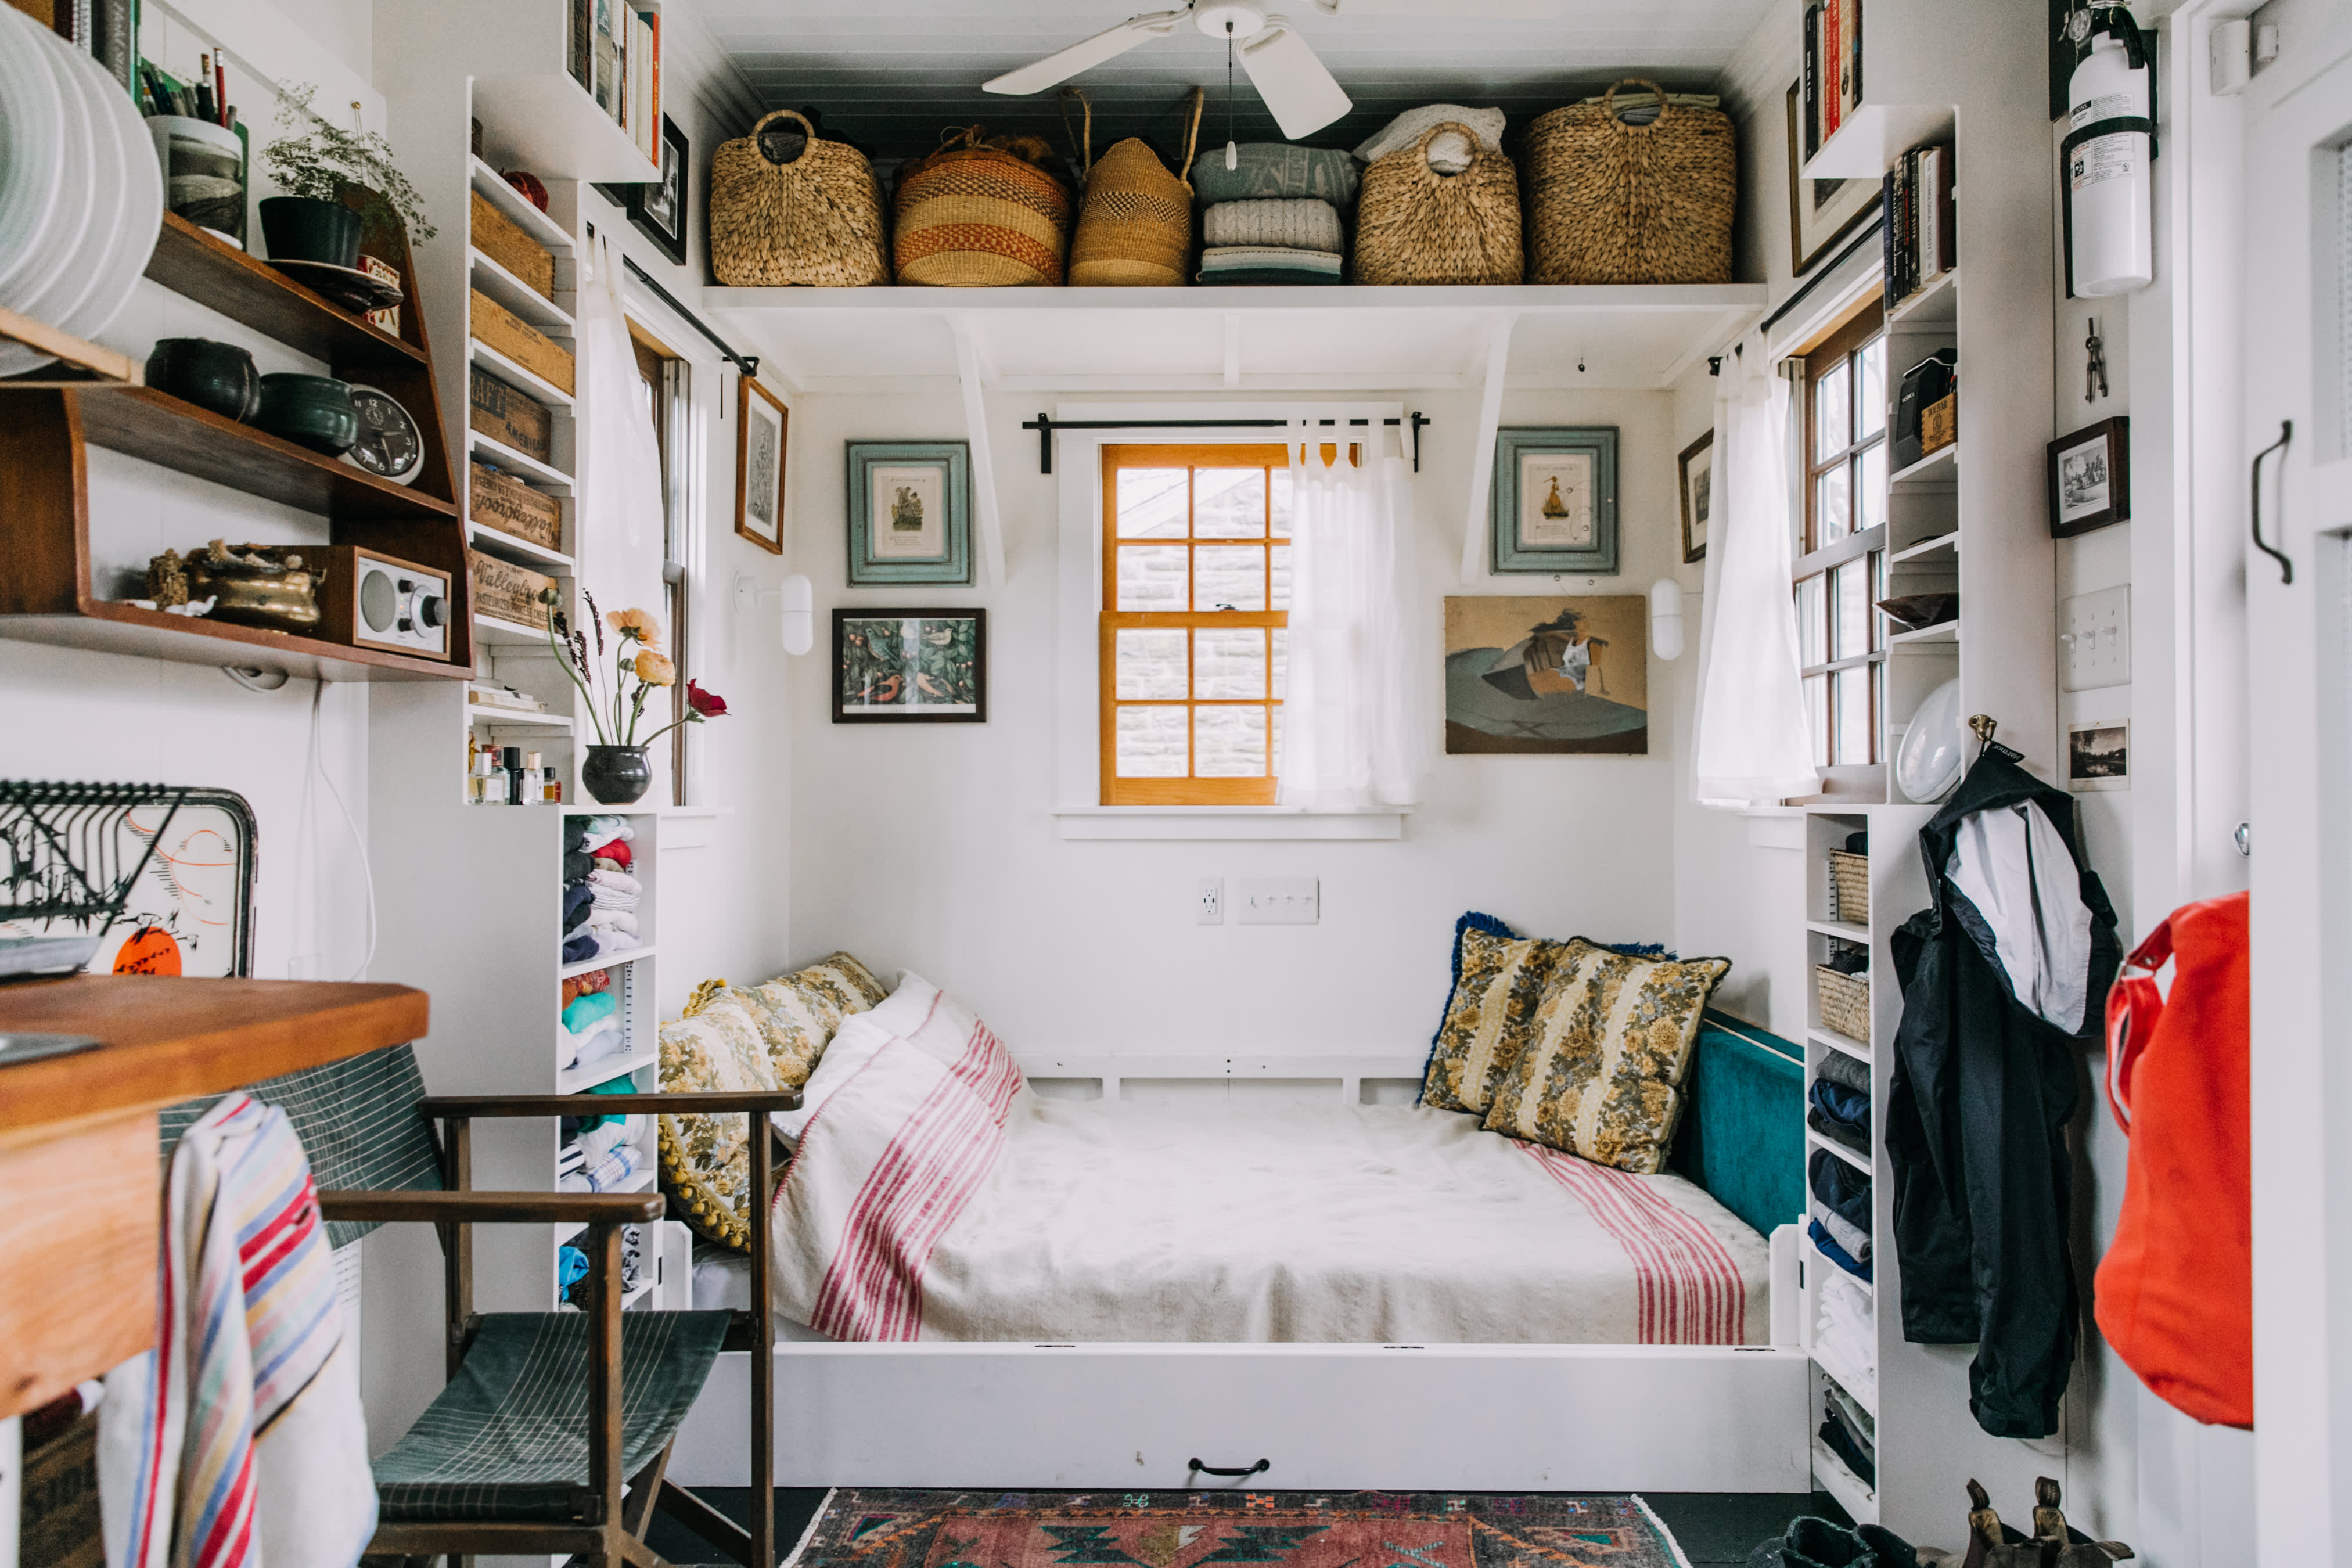 No More Room? Here's How To Maximize Storage For Small Spaces